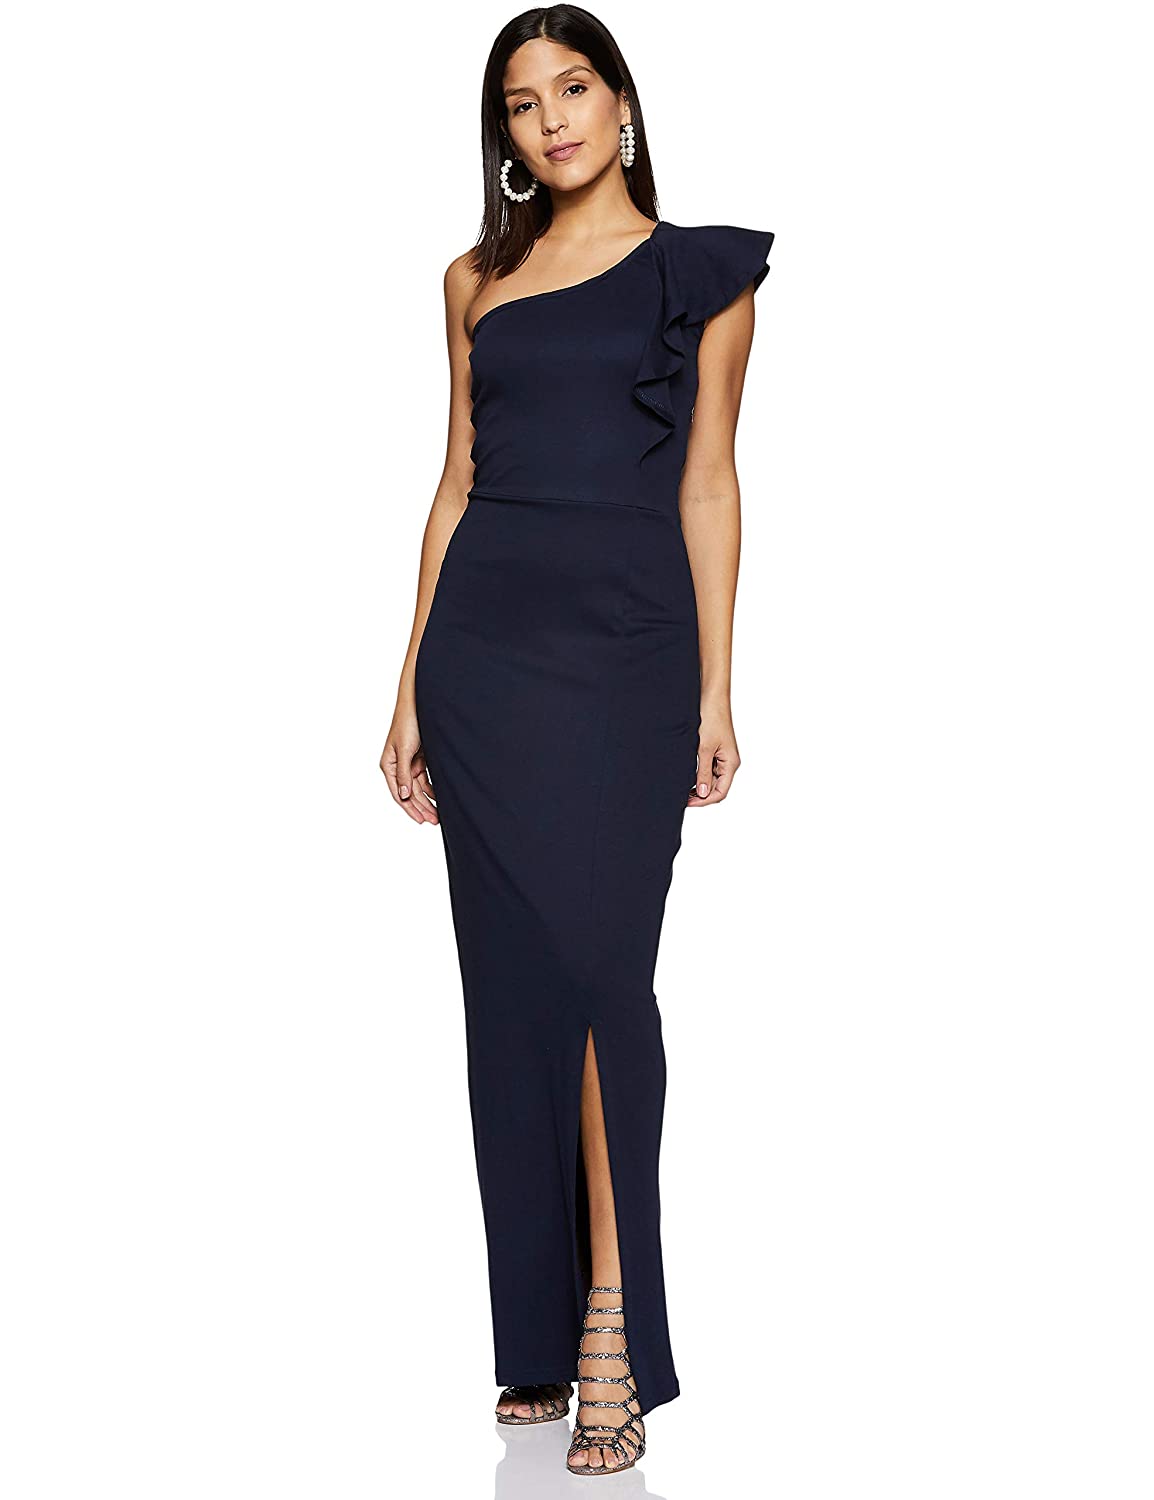 Indu Jha Recommends | Buy Miss Chase Women's Navy Blue Solid One Shoulder Sleeveless Ruffled Slit Maxi Dress